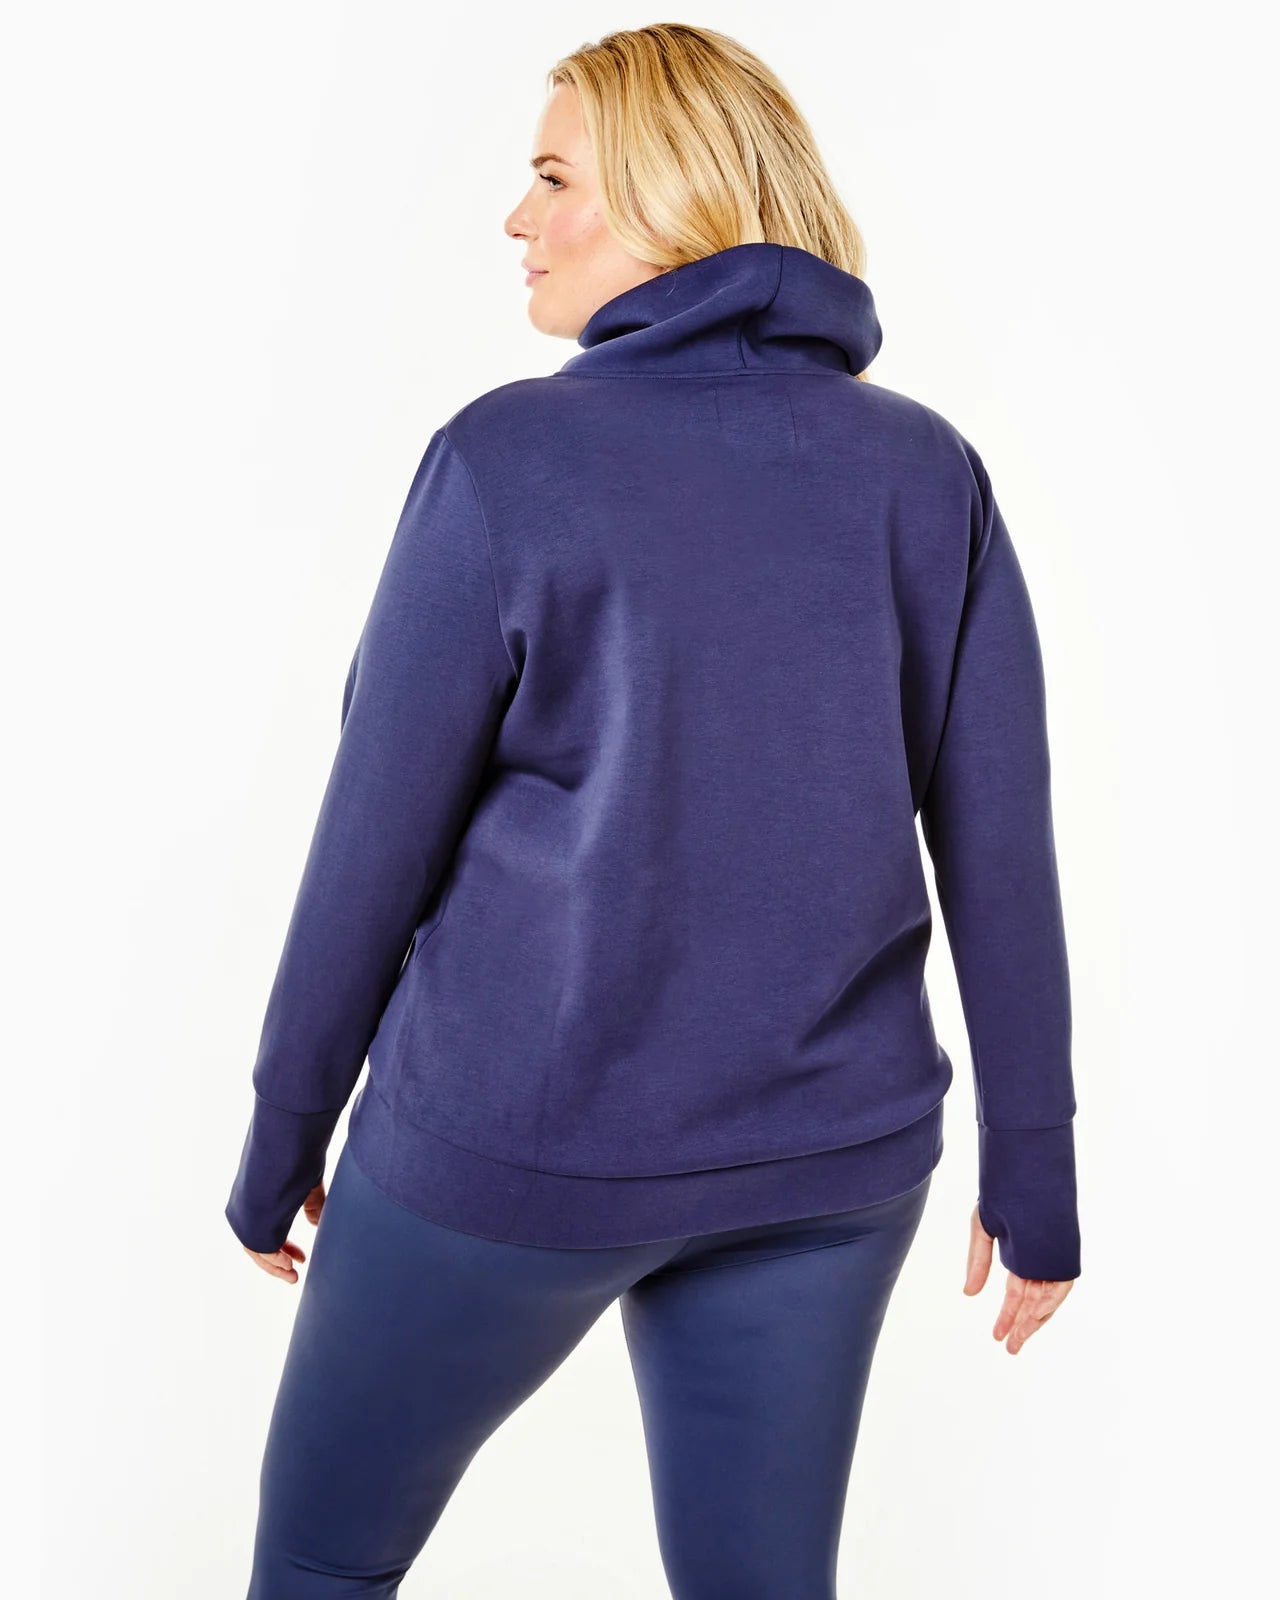 ADDISON BAY - The Everyday Pullover - Navy